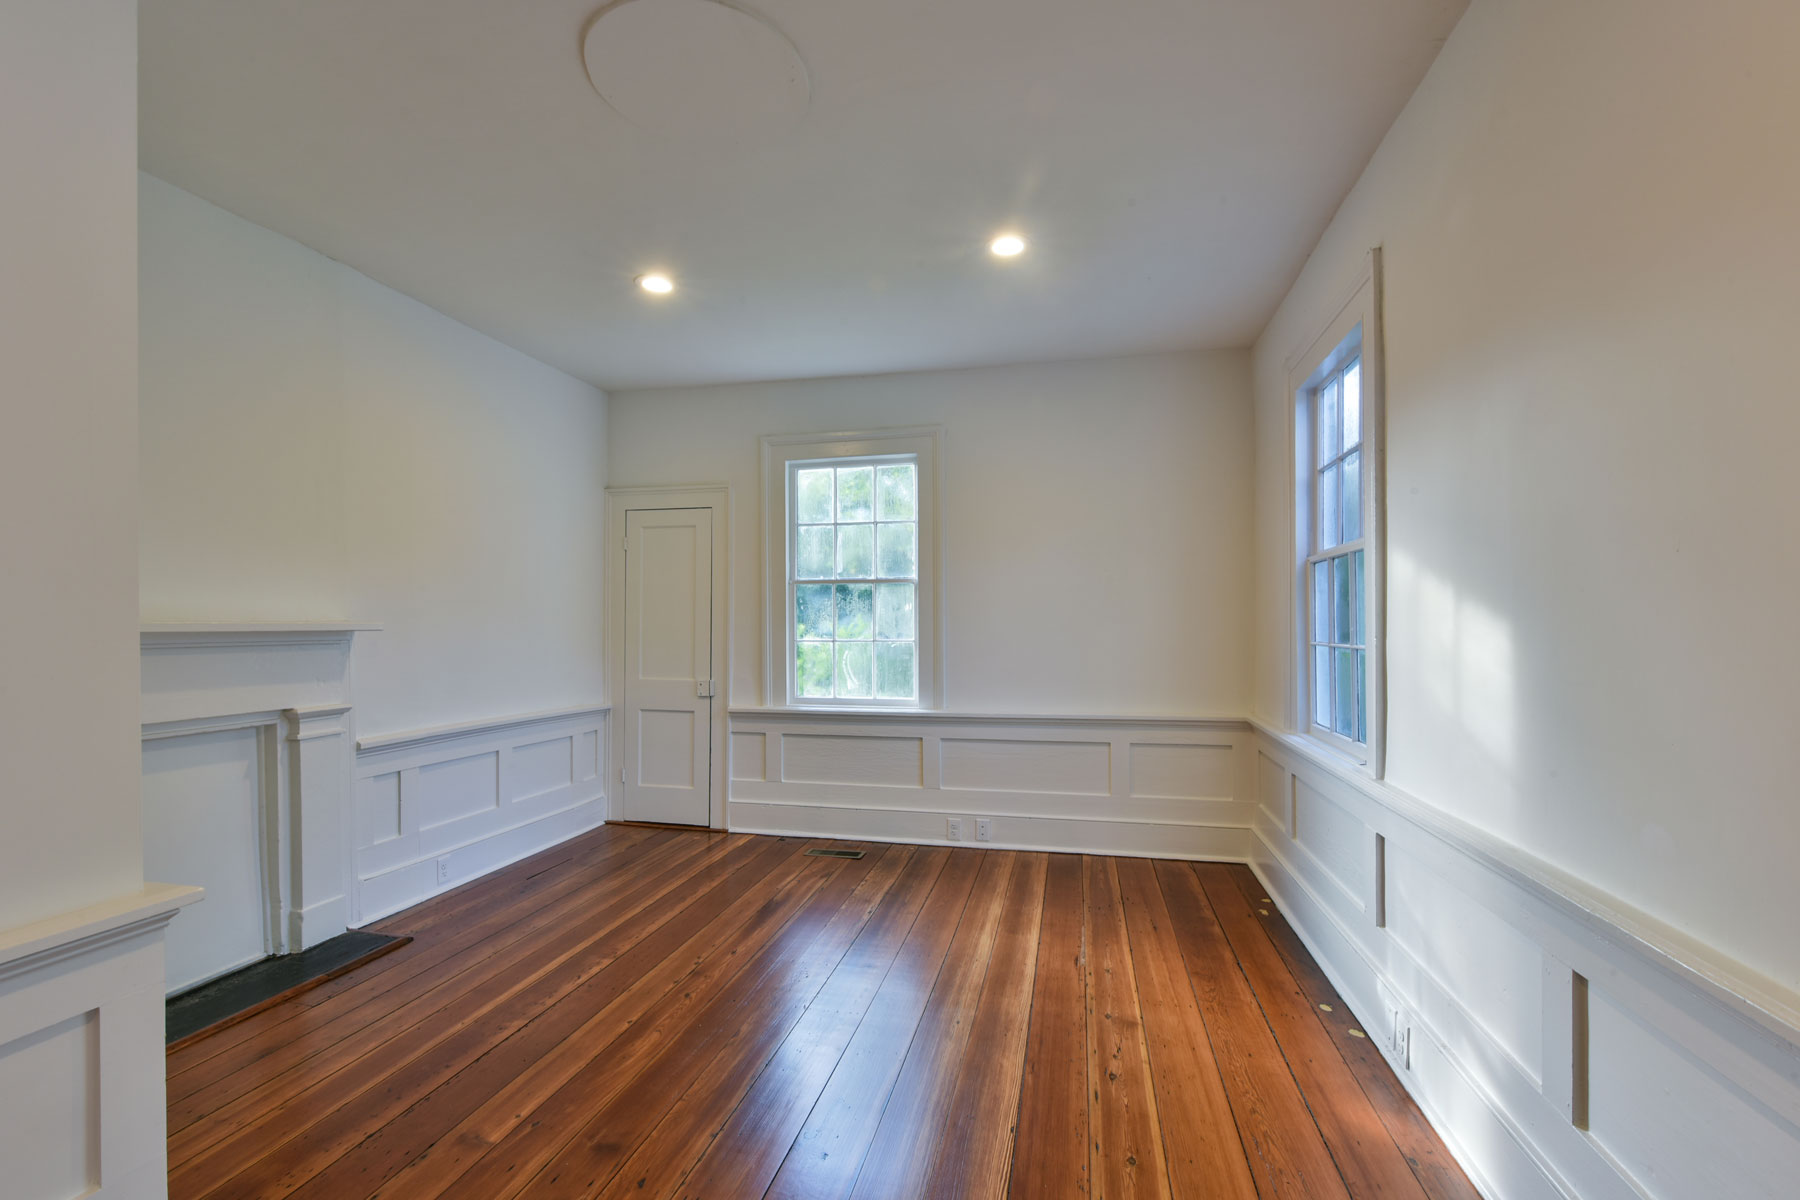 Wainscotting and millwork preserved during renovation